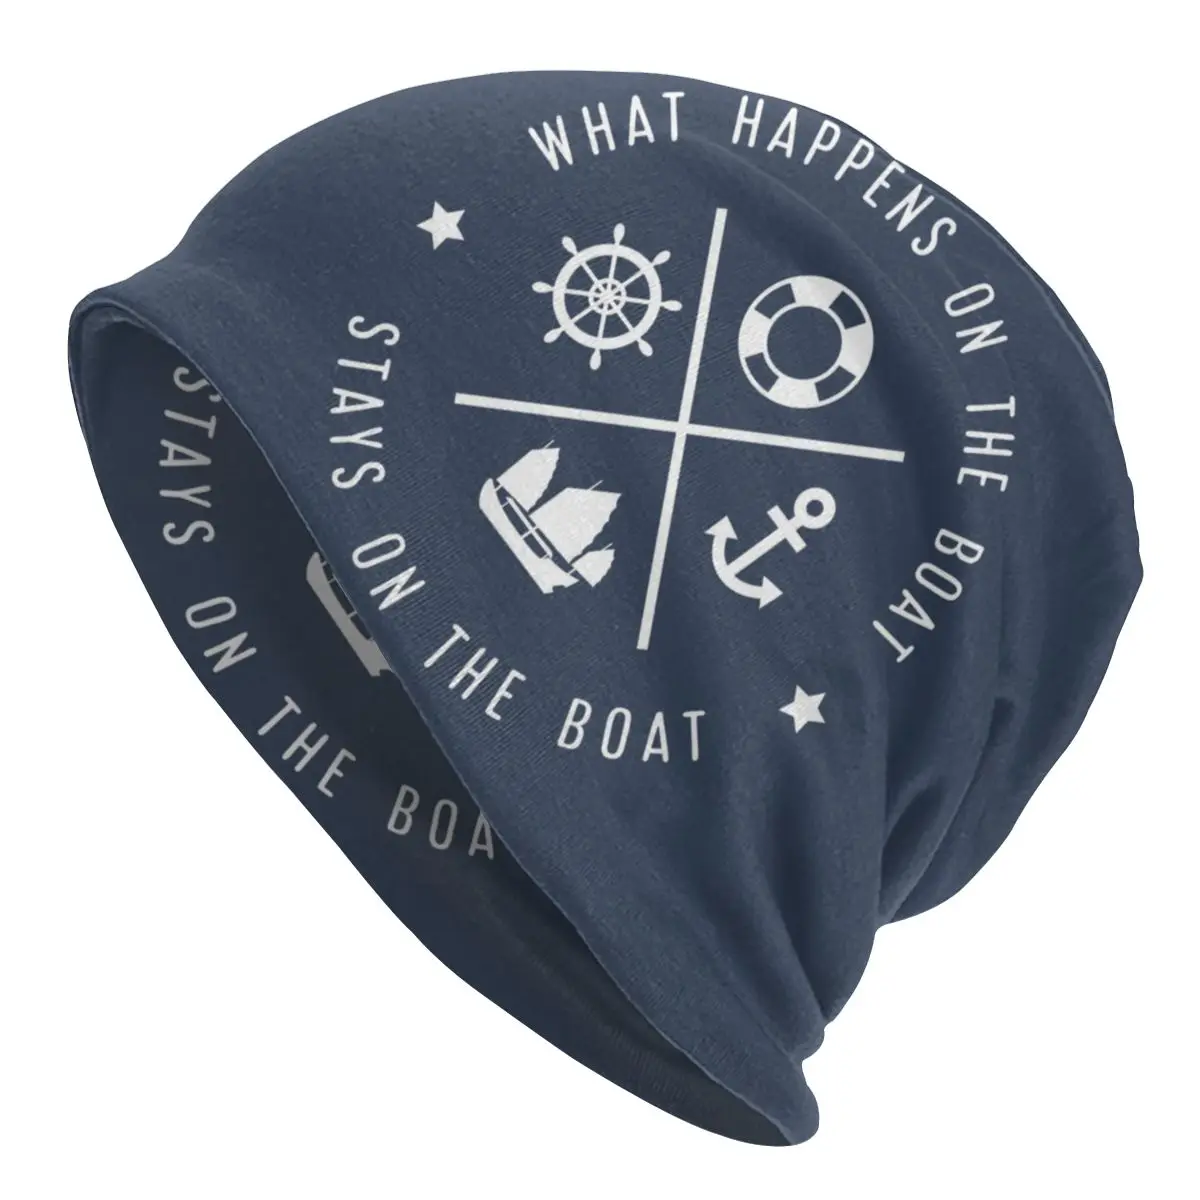 What Happens On The Boat Stays Beanie Custom Winter Warm Skullies Beanies Hats Adult Nautical Sailor Quotes Knitted Bonnet Cap